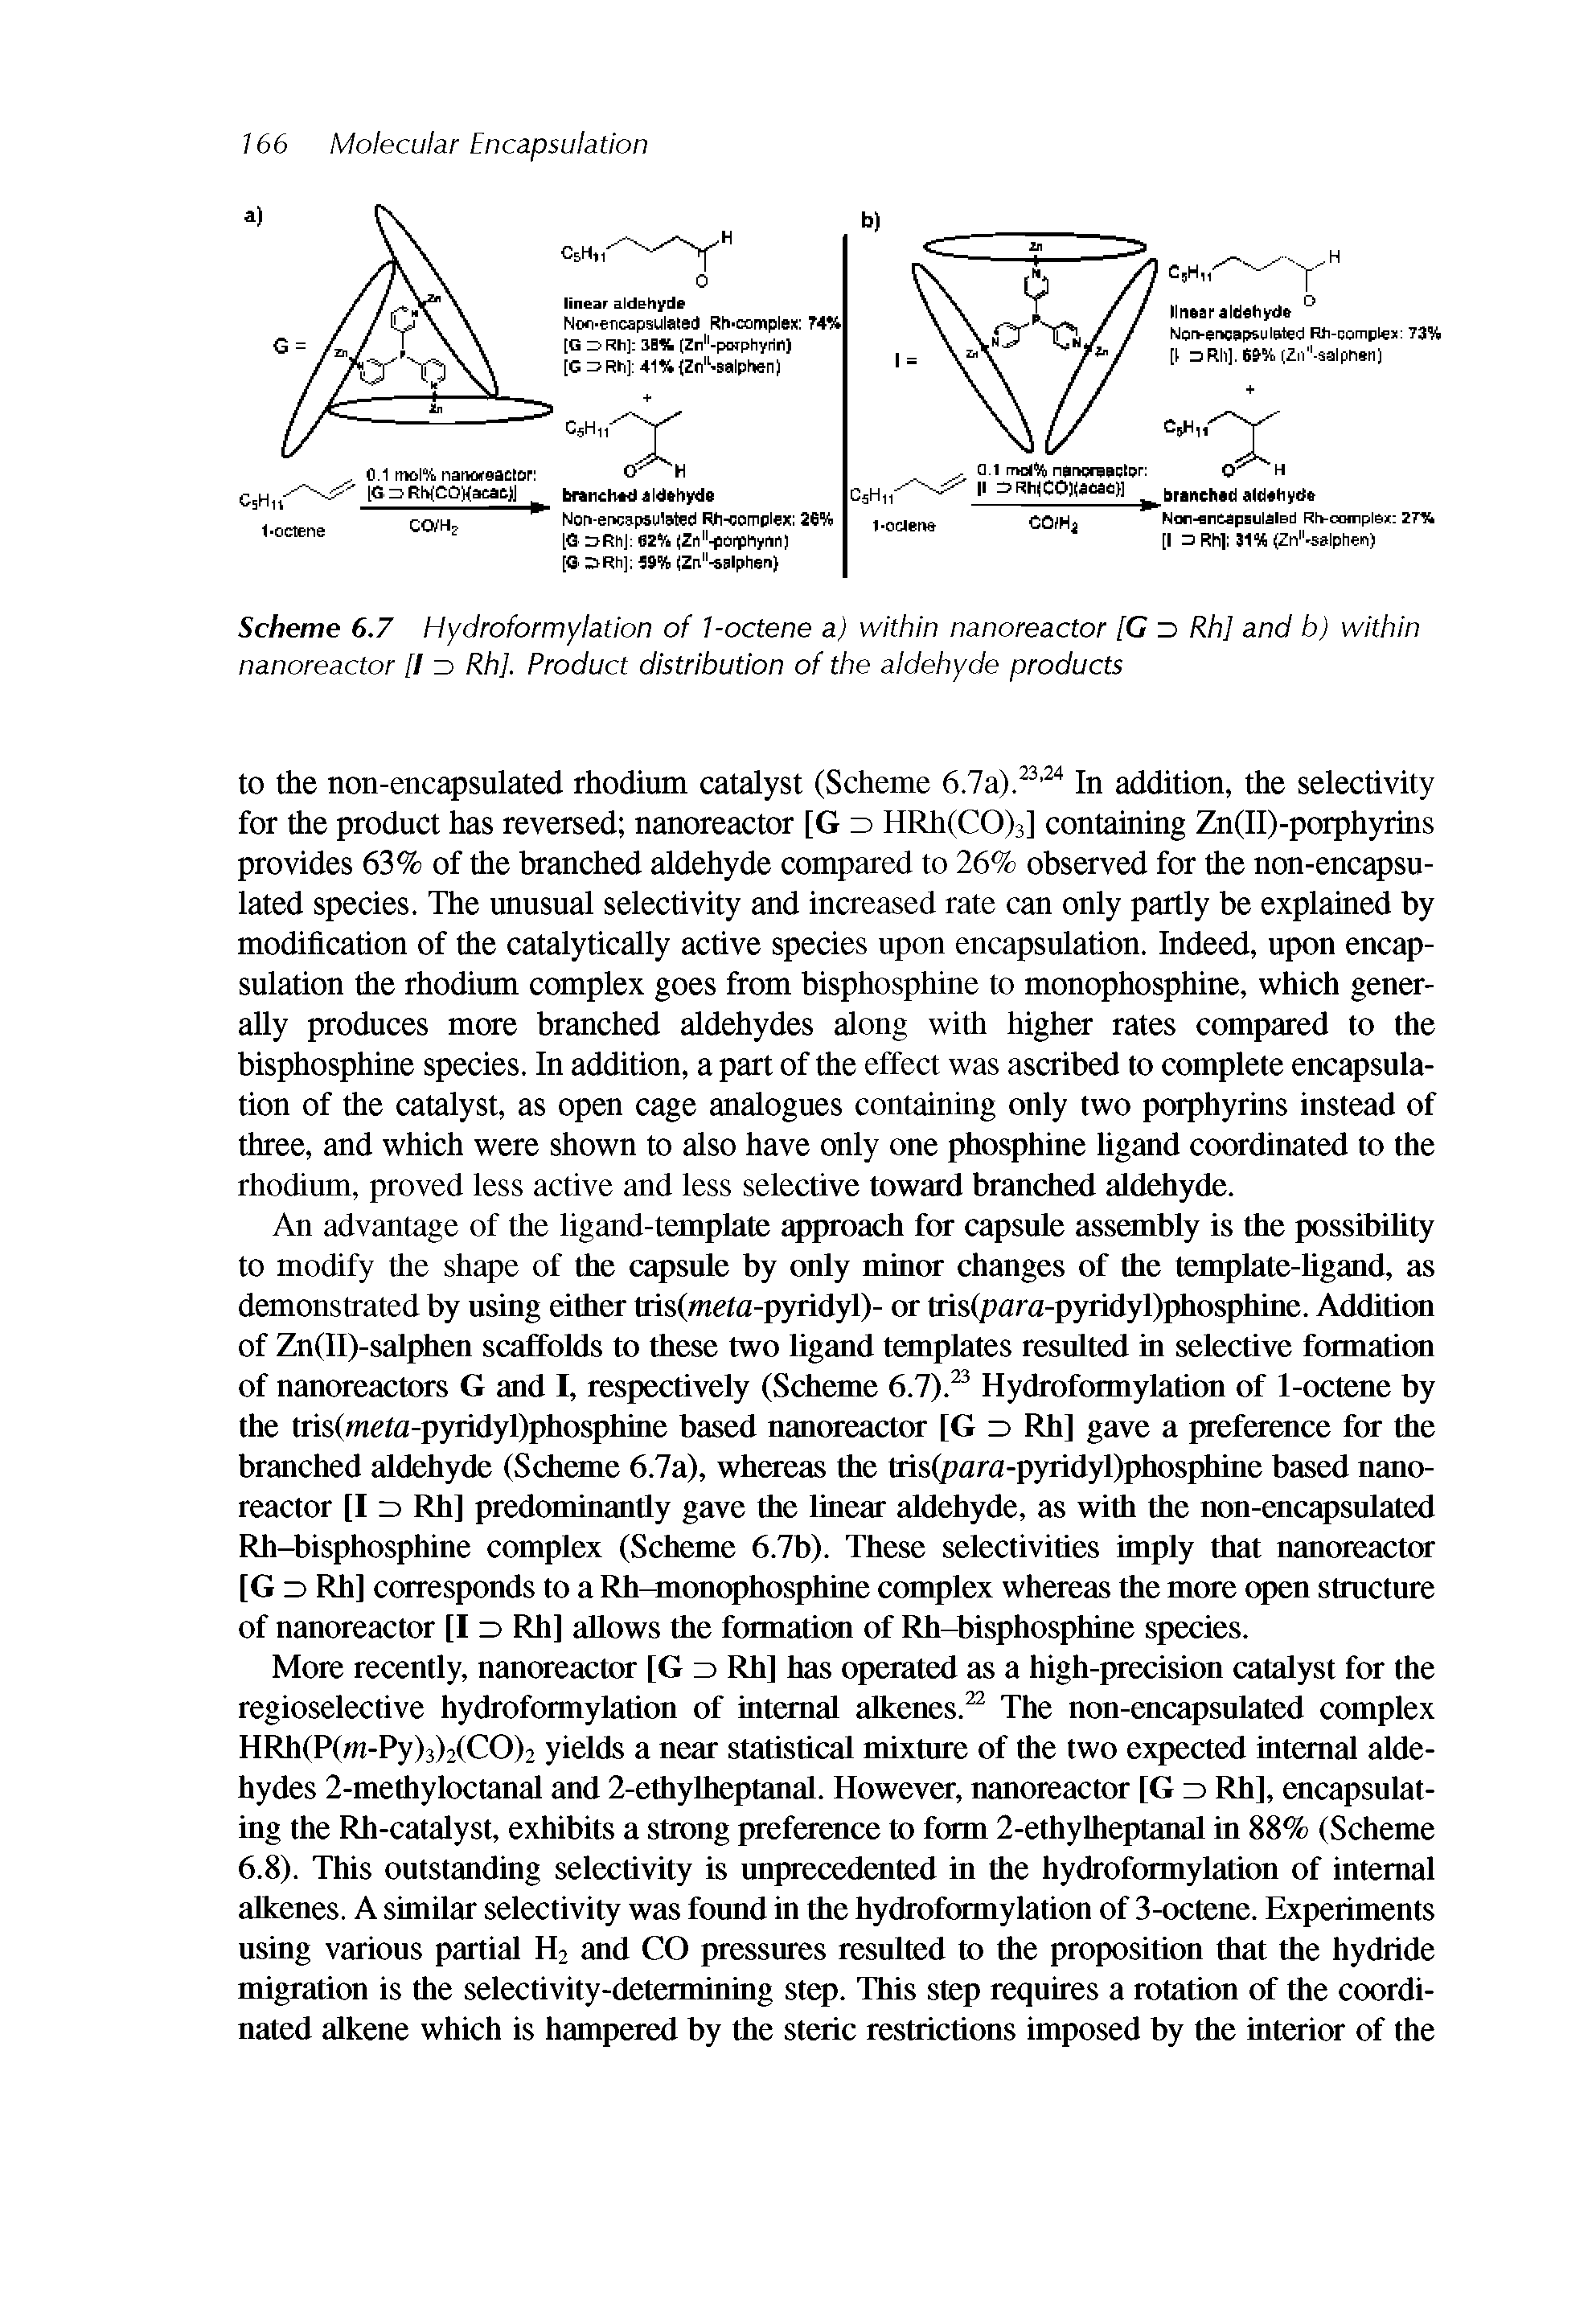 Scheme 6.7 Hydroformylation of 1-octene a) within nanoreactor [G z> Rh] and b) within nanoreactor [I 3 RhJ. Product distribution of the aldehyde products...